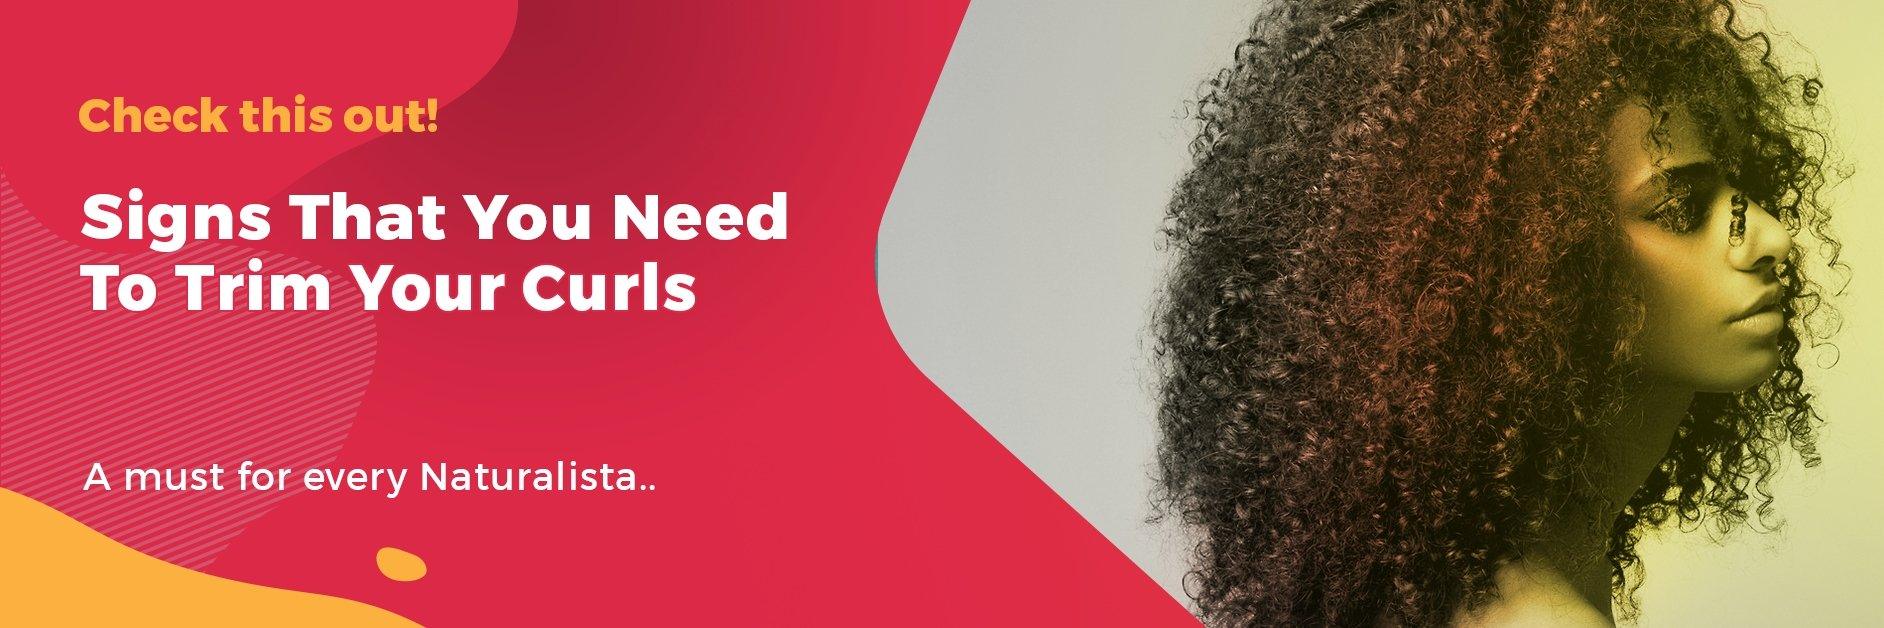 Signs That You Need To Trim Your Curls - A Must For Every Naturalista - GlammedNaturallyOil